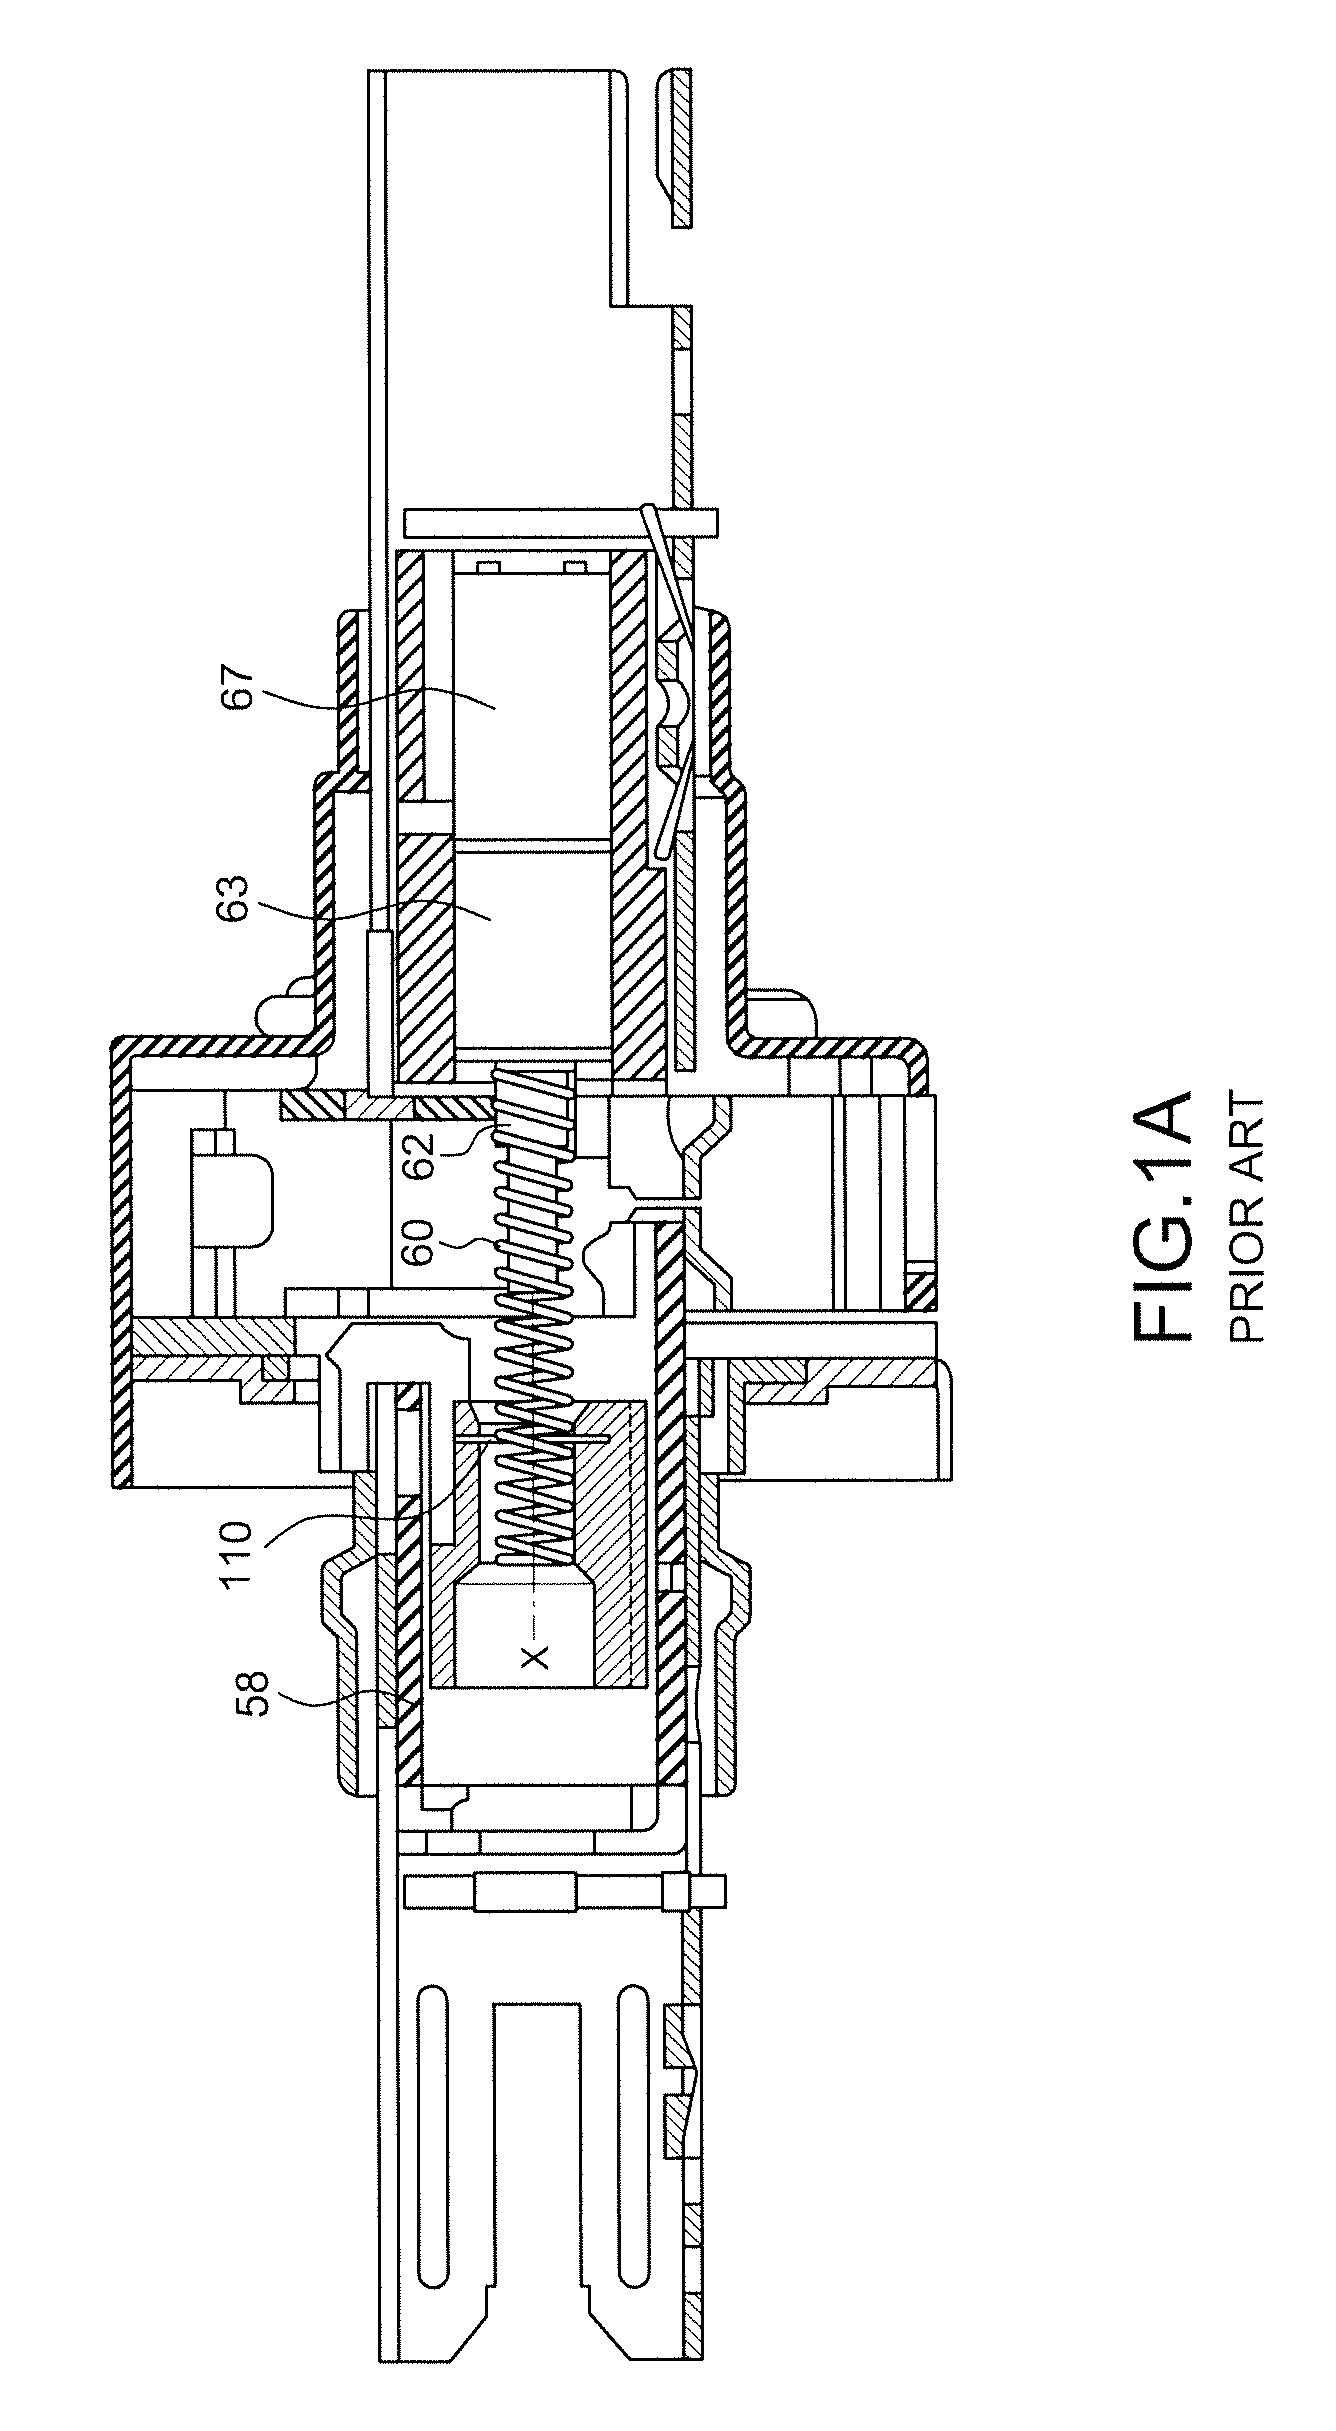 Driving device for an electric lock latch